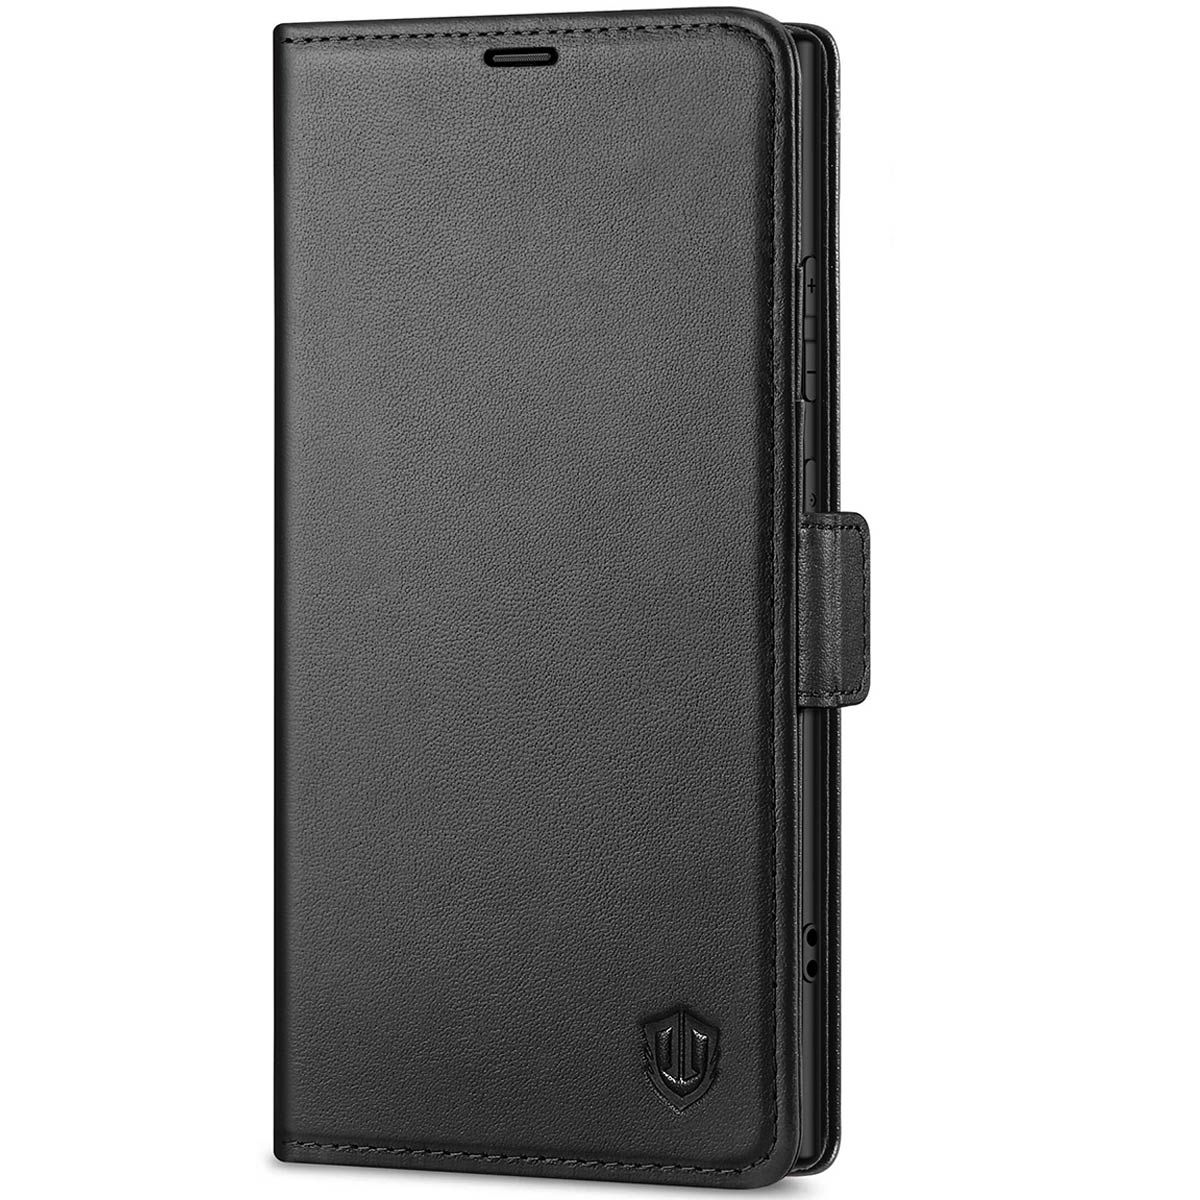 Galaxy Pull Tab Leather Case, Samsung Galaxy S24 Ultra Pull up